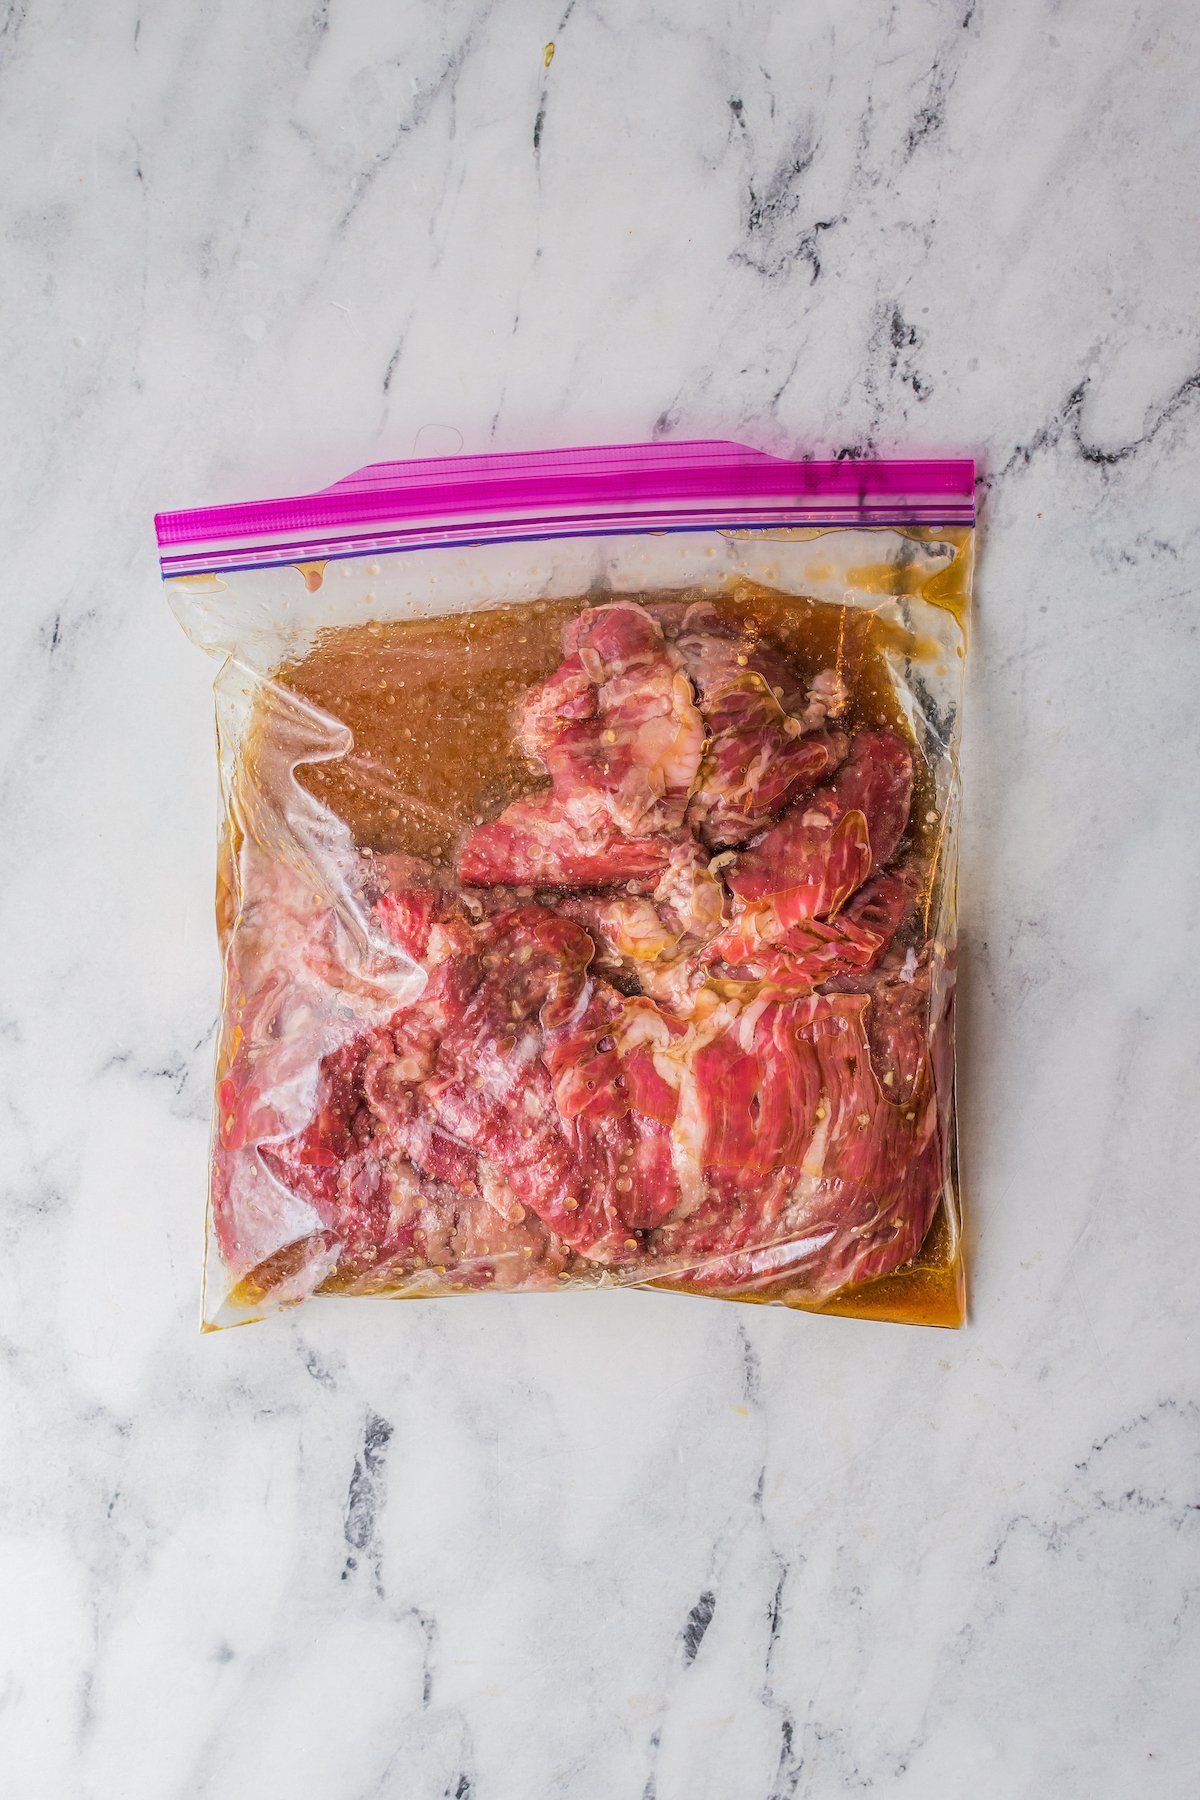 Flank steak in a bag with marinade.